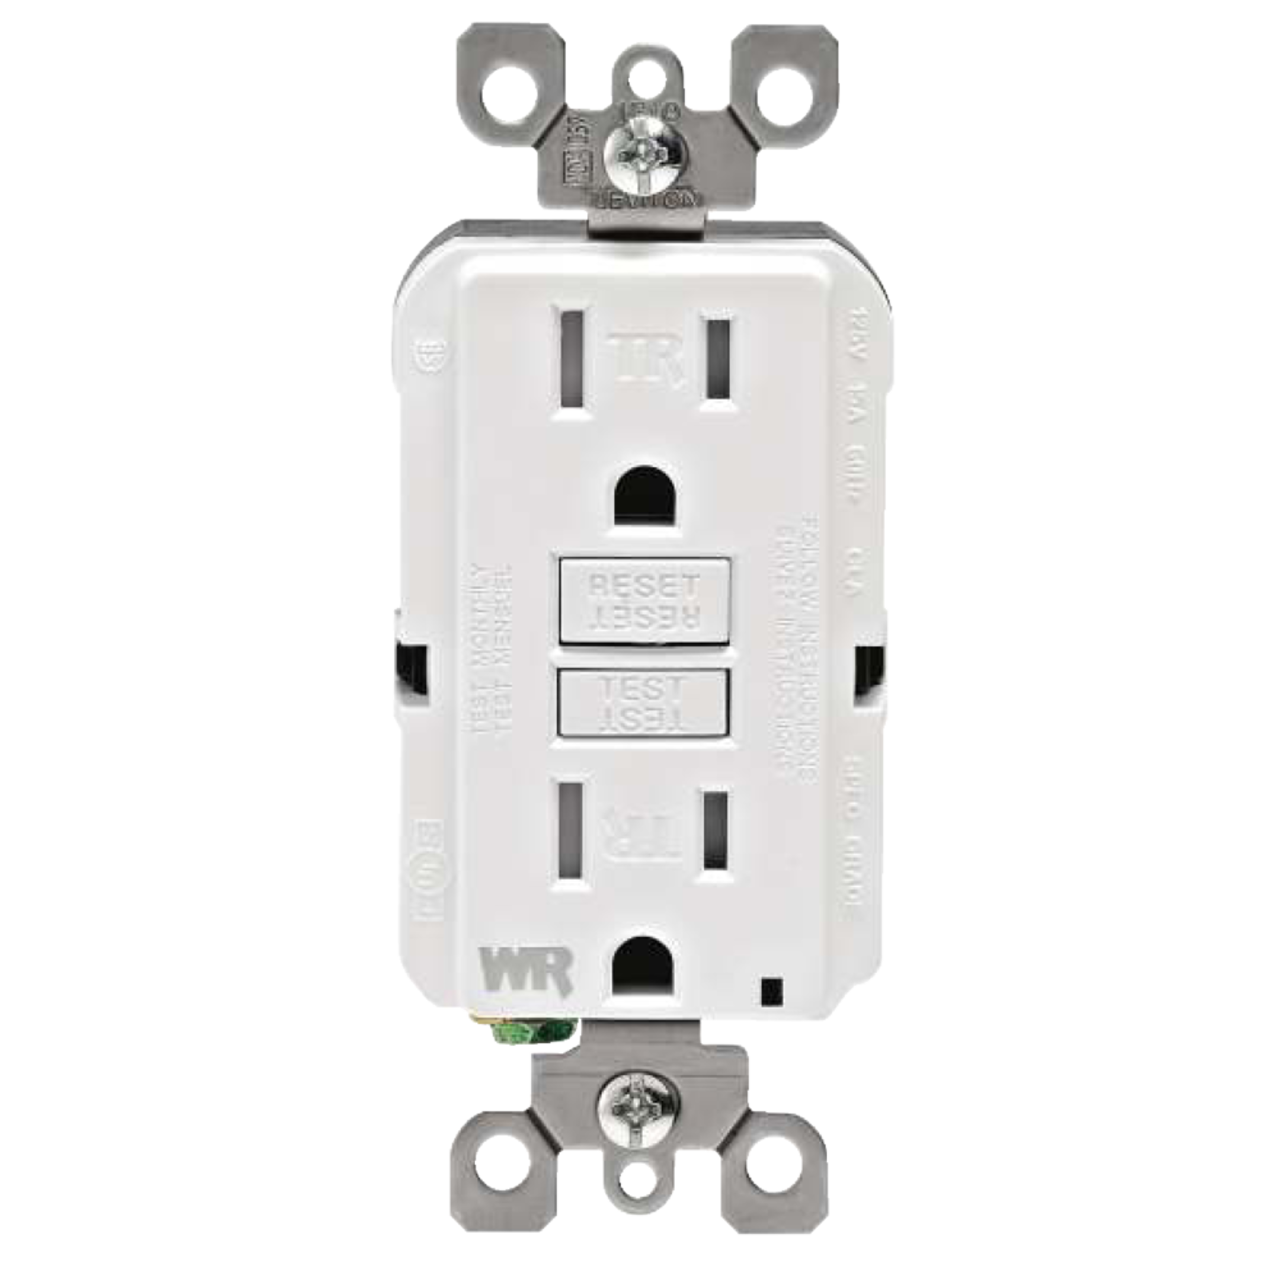 Leviton GFWT1-762 Weather/Tamper-Resistant SmartlockPro GFCI Receptacle/ Outlet with Wall Plate, White